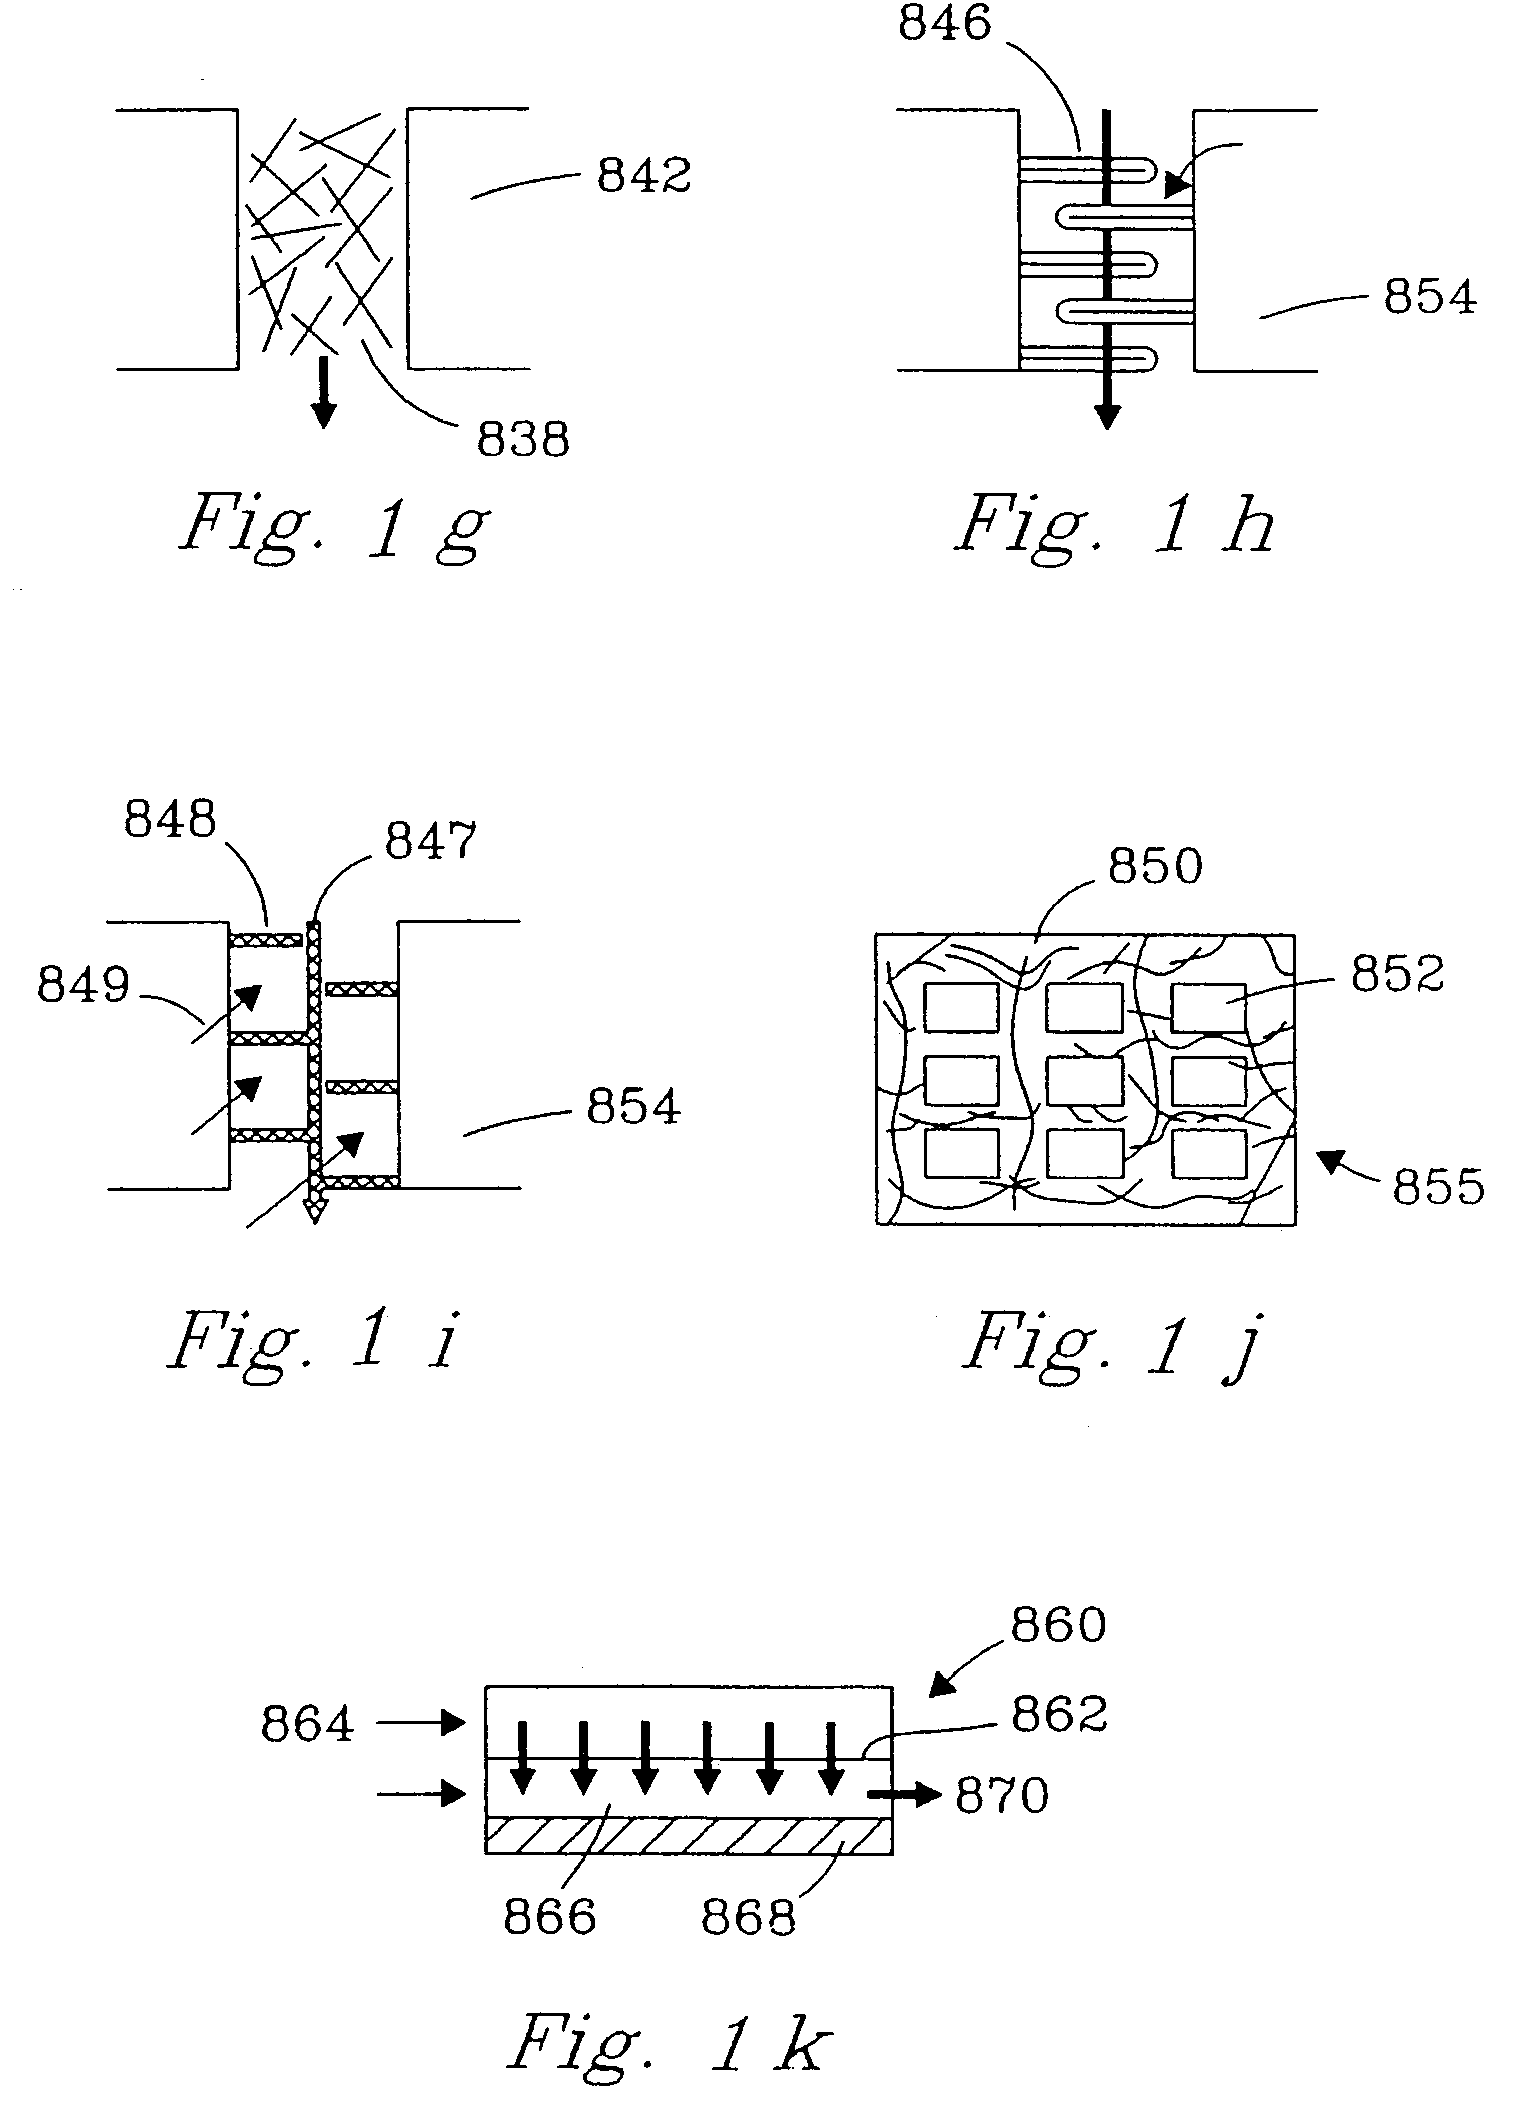 Chemical reactor and method for gas phase reactant catalytic reactions